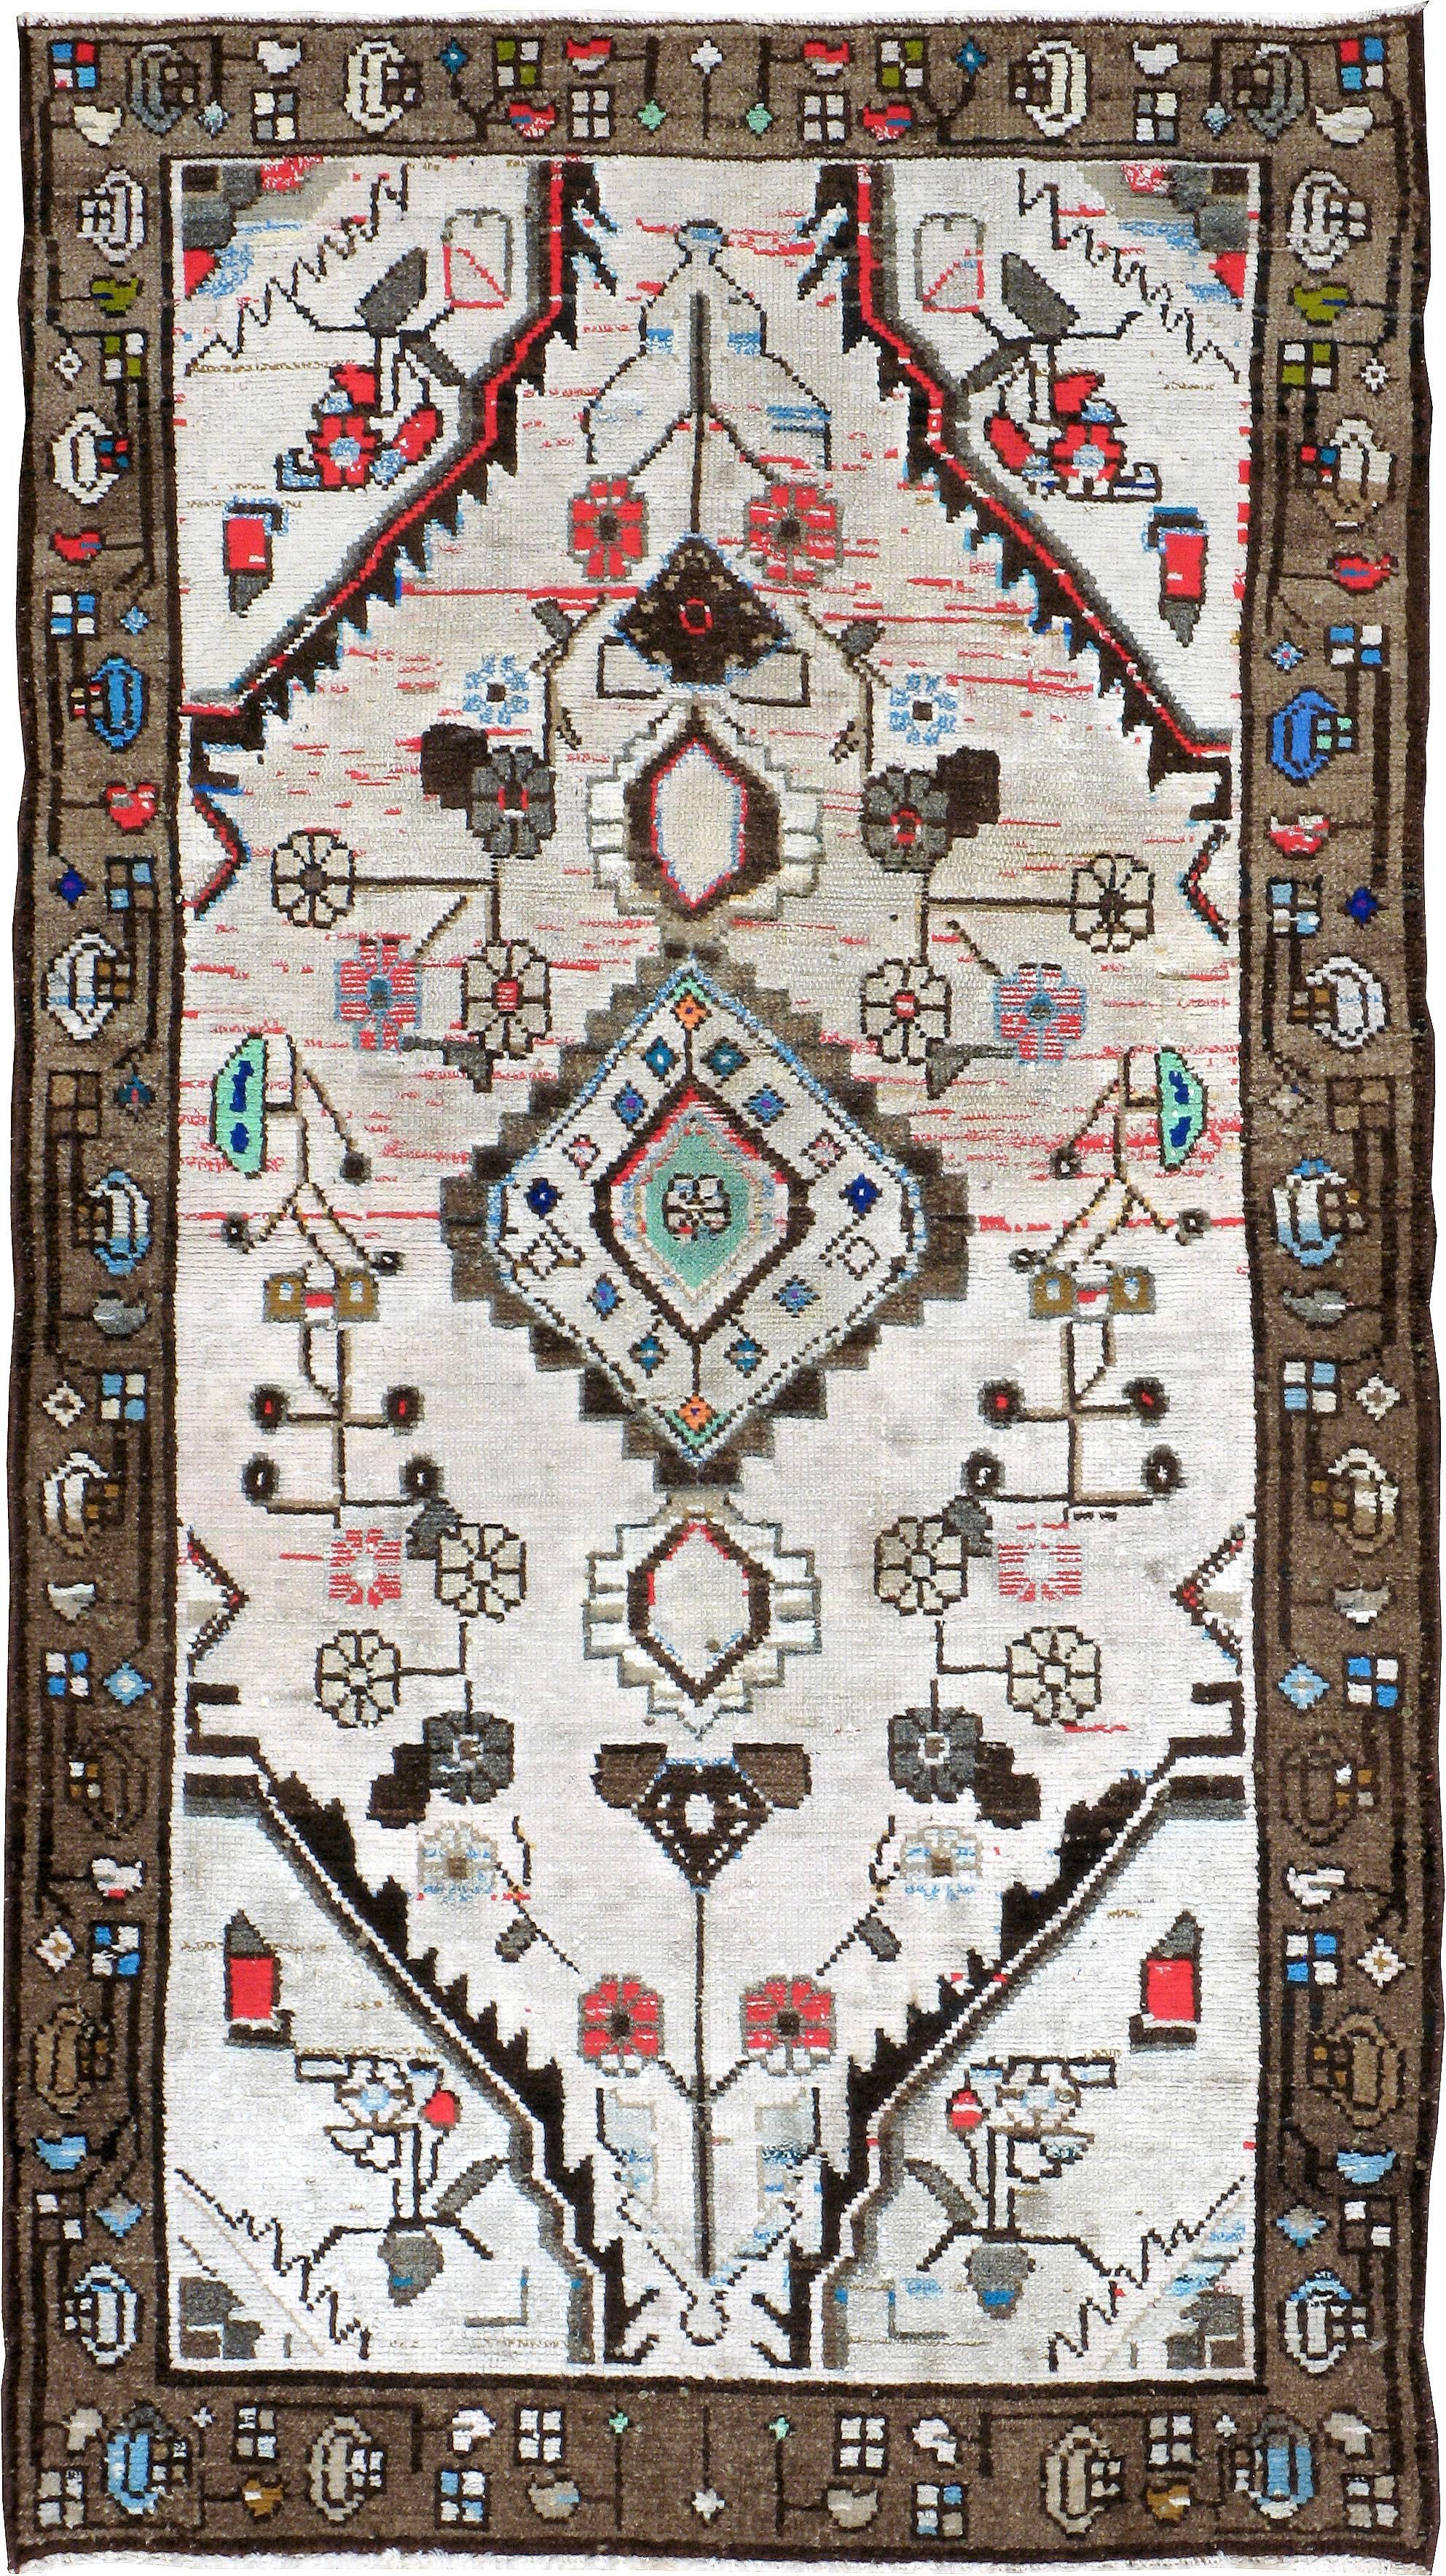 A vintage Persian Hamadan carpet from the second quarter of the 20th century with cotton highlights.

Measures: 2' 8